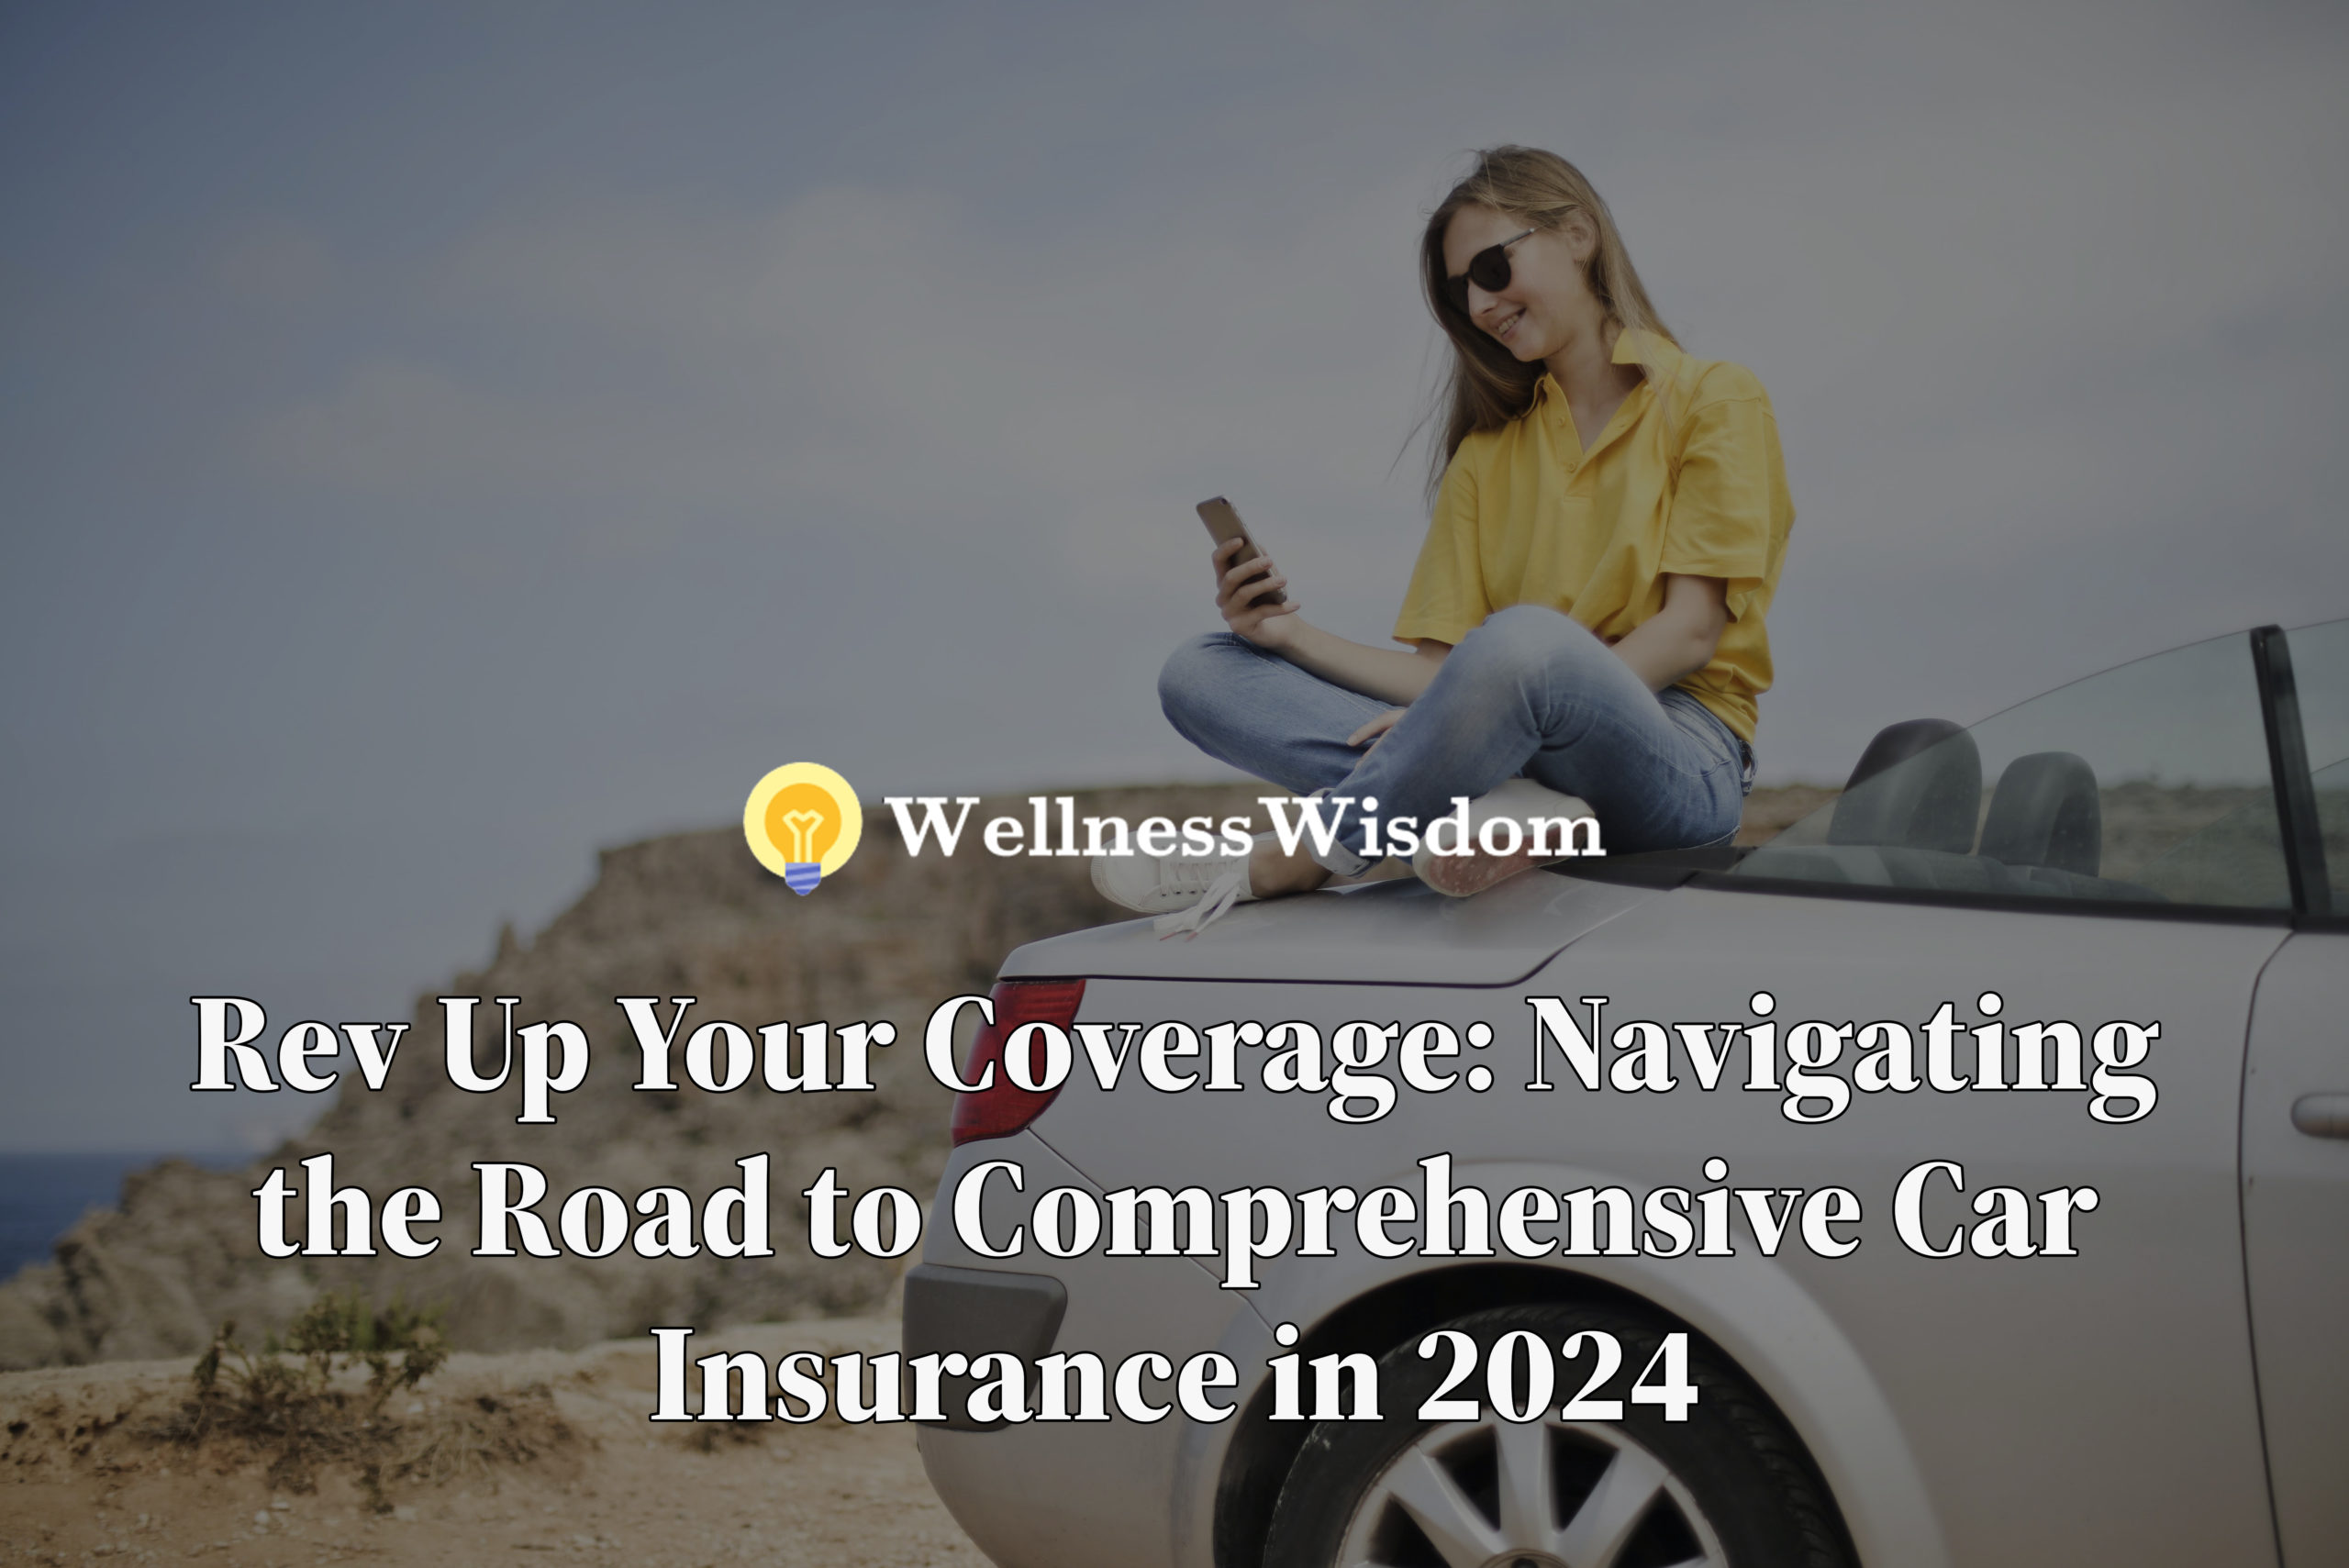 Rev Up Your Coverage Navigating the Road to Comprehensive Car Insurance in 2024